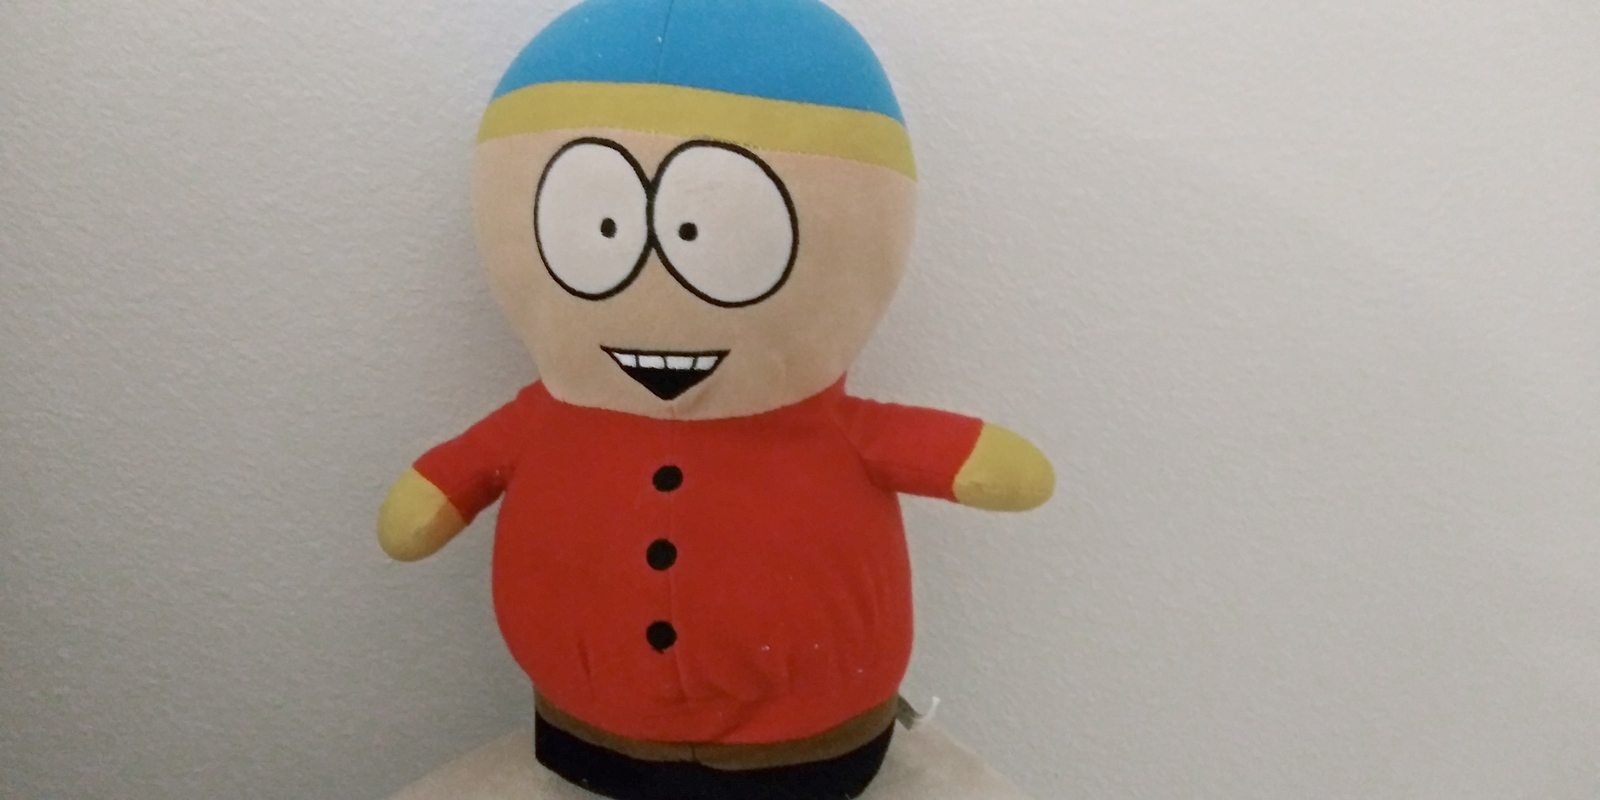 2008 Comedy Central South Park Stan 7 Plush Doll Toy Figure Nwt Film Tv Spielzeug - roblox figures nwt